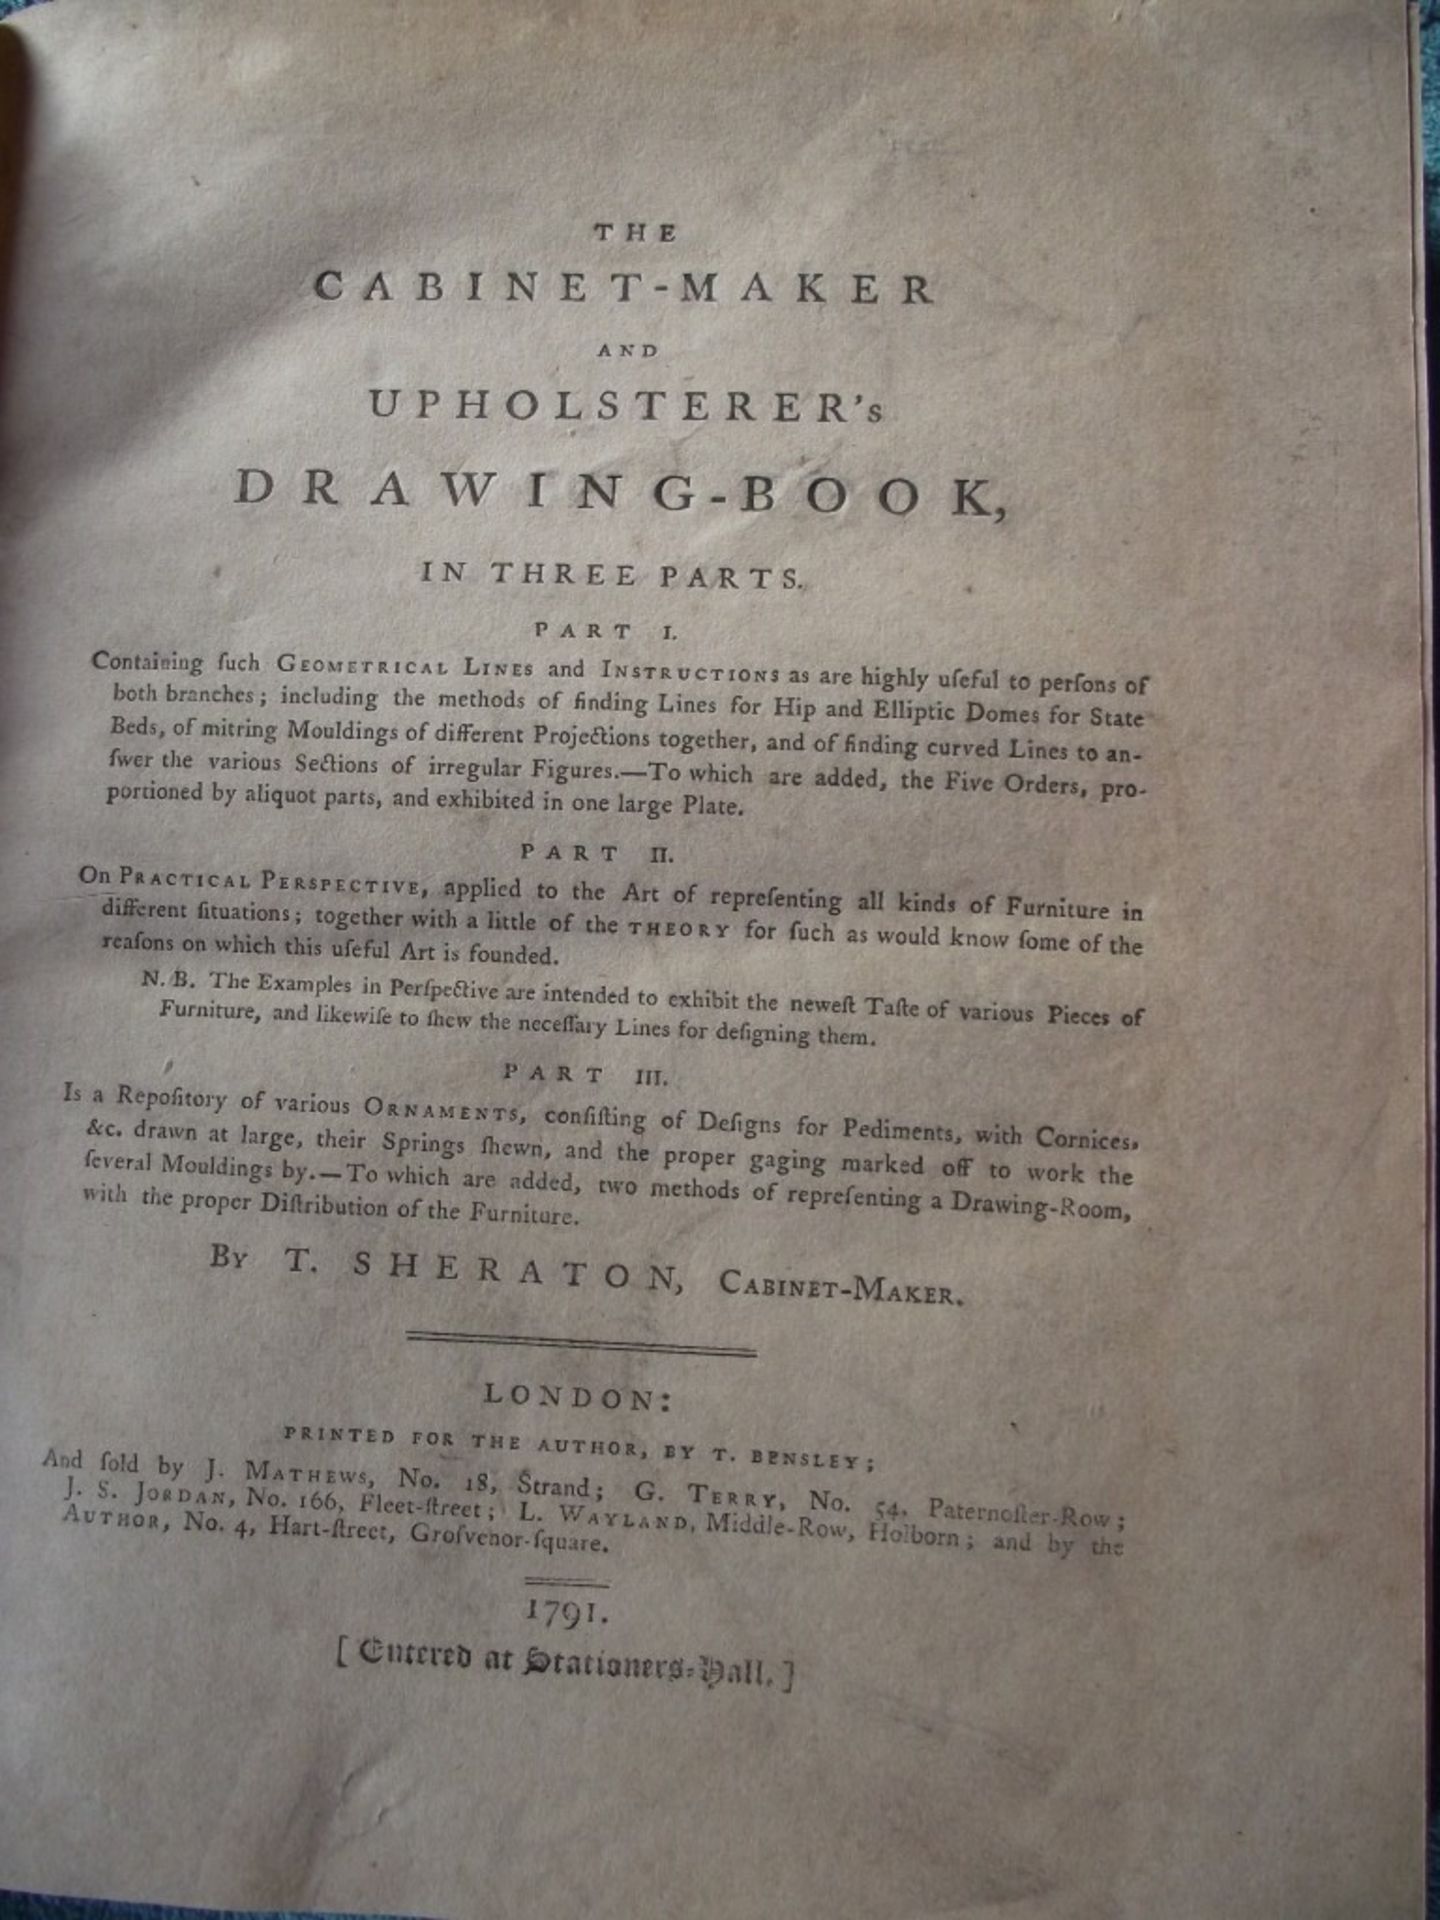 The Cabinet-Maker and Upholsterer's Drawing Book In Three Parts by T. Sheraton, Cabinet Maker - 1... - Image 28 of 38